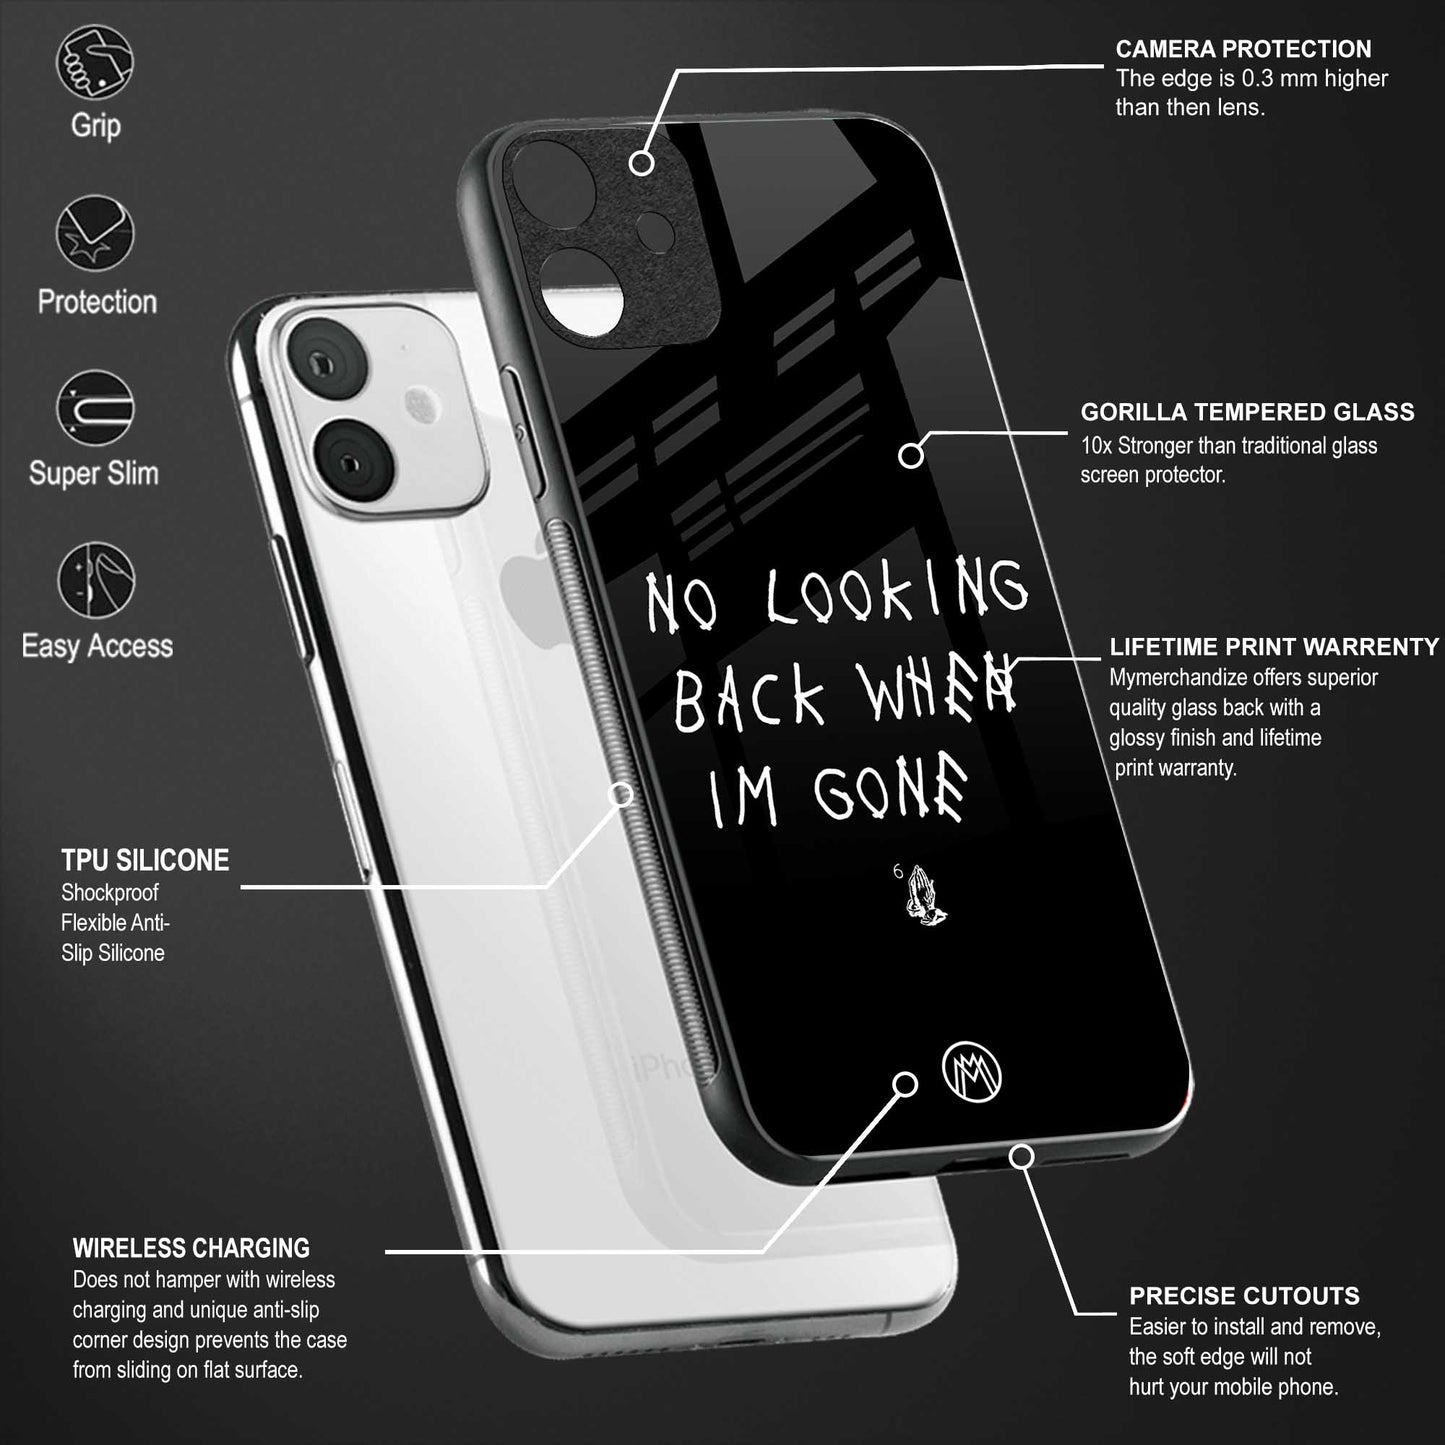 no looking back back phone cover | glass case for vivo y73